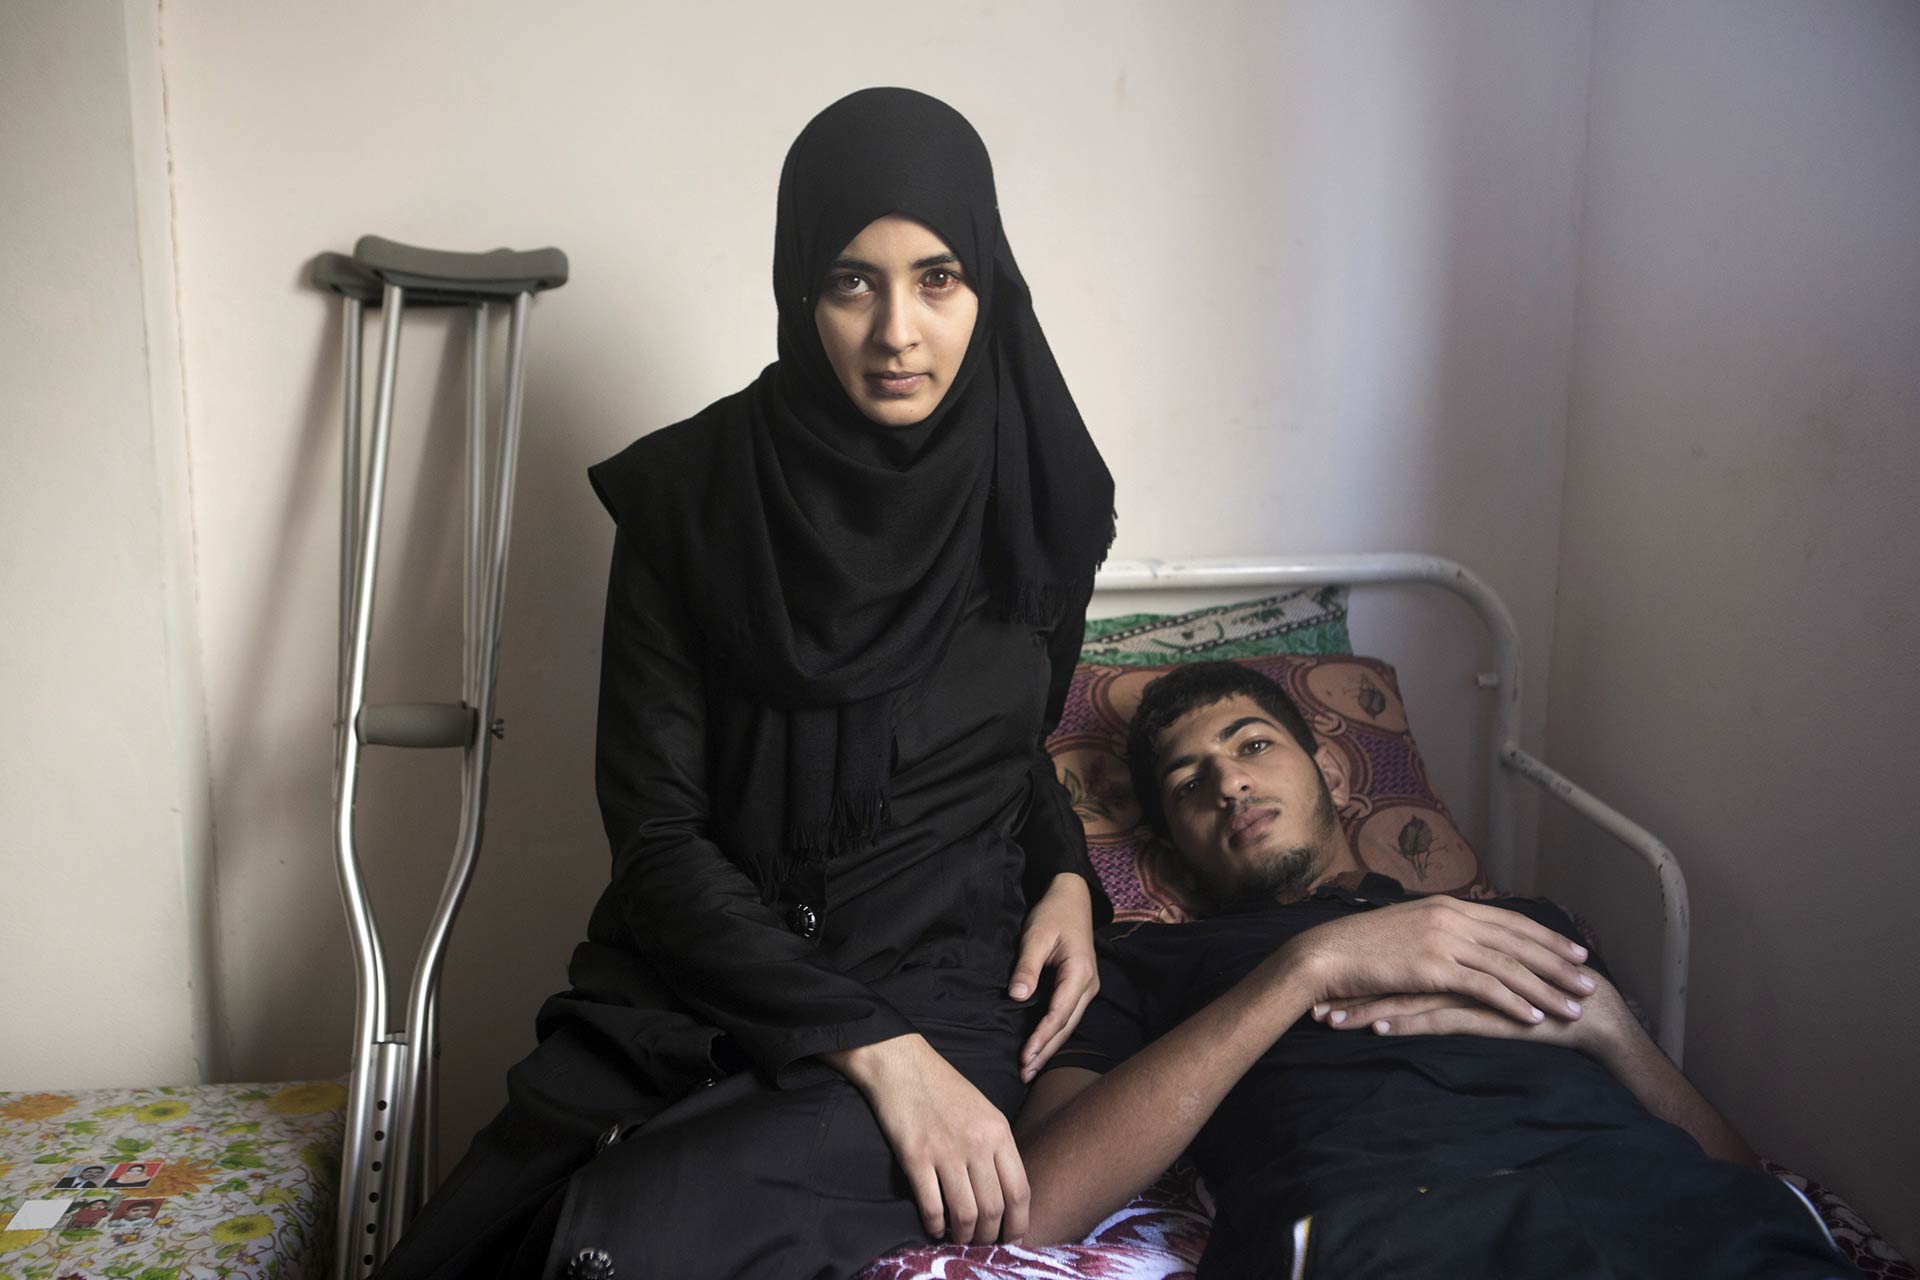 “I heard Wafaa' screaming from under the rubble. I could see only her toes moving. I tried to remove the stones that fell on her, but it was too much. Instead, I started to dig beneath her and managed to pull her out. She was wounded in her head, bleeding from her eye. Her arm was also injured. Momen was three meters away from Wafaa'. He was also screaming.” - recalls Mustafa.
